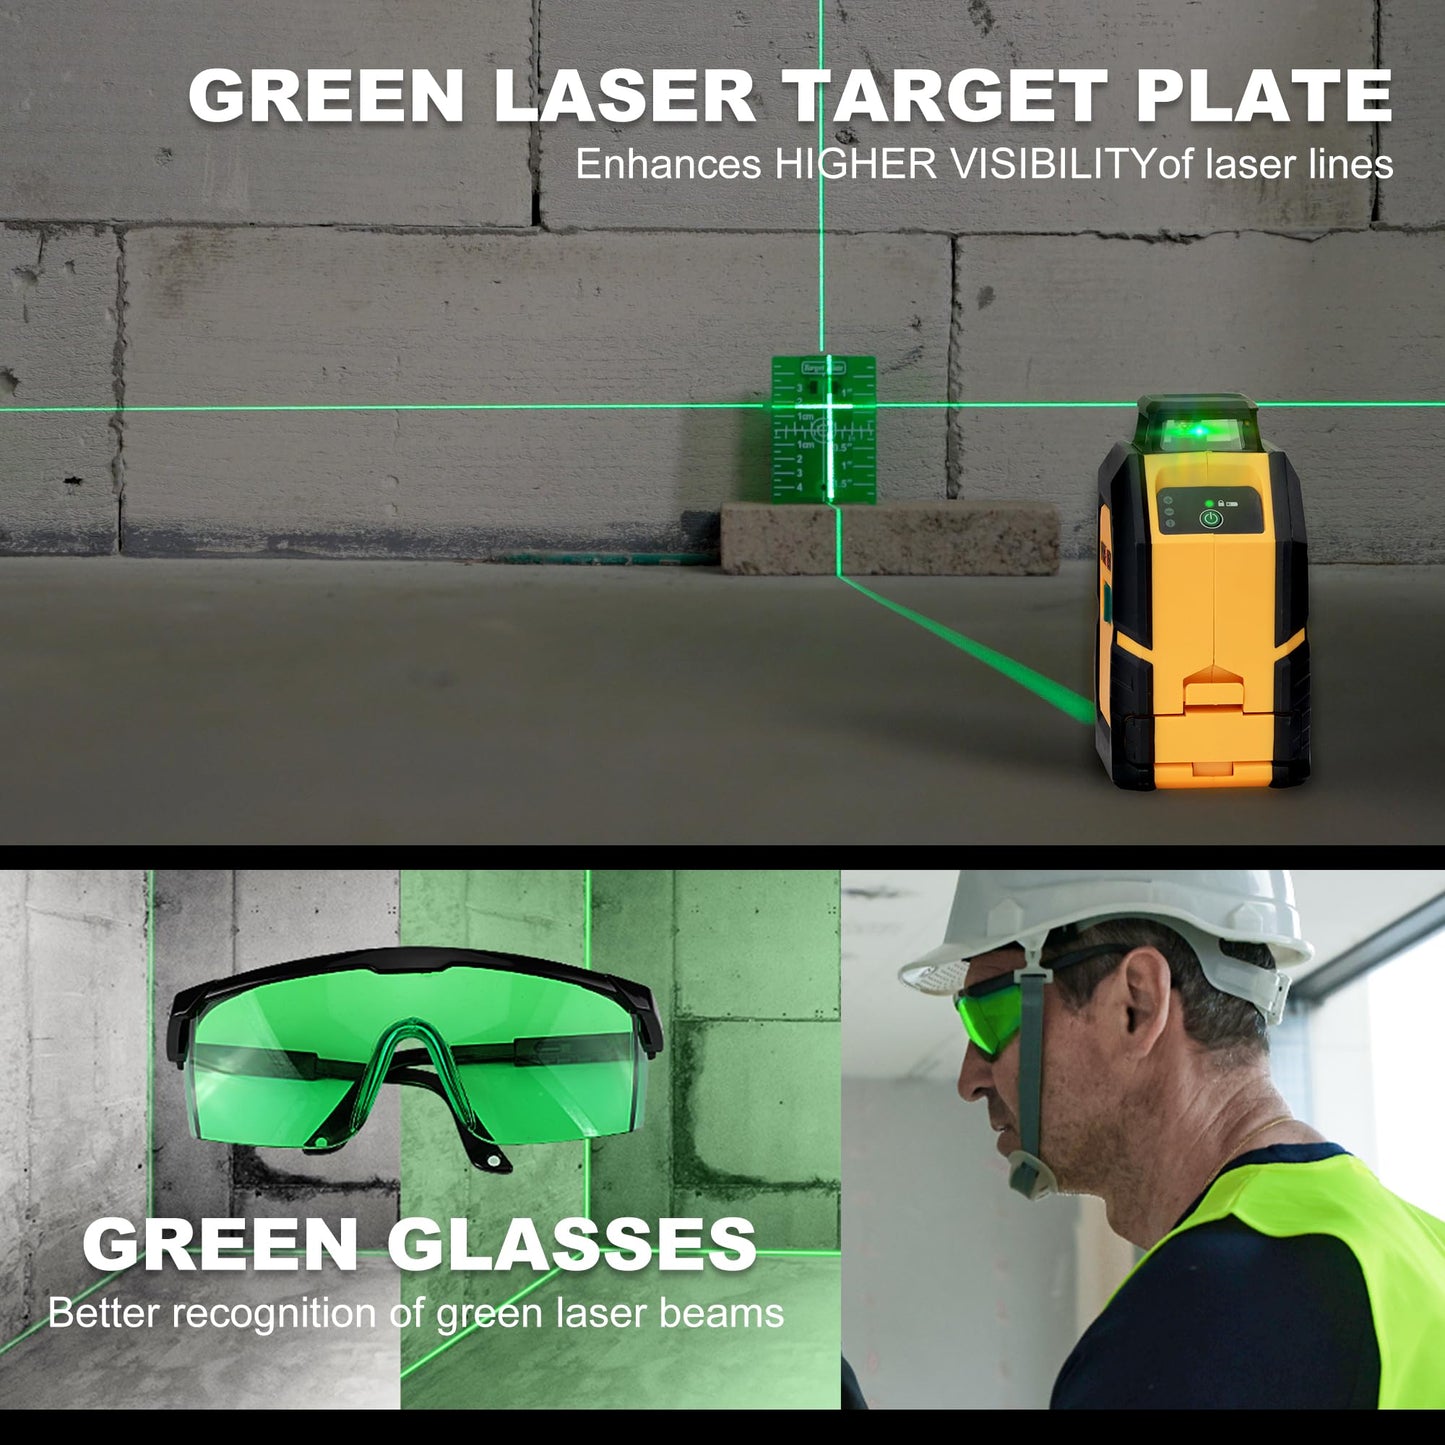 PREXISO 360° Laser Level with Tripod, 100Ft Self Leveling Cross Line Laser- Green Horizontal Line for Construction, Floor Tile, Renovation with